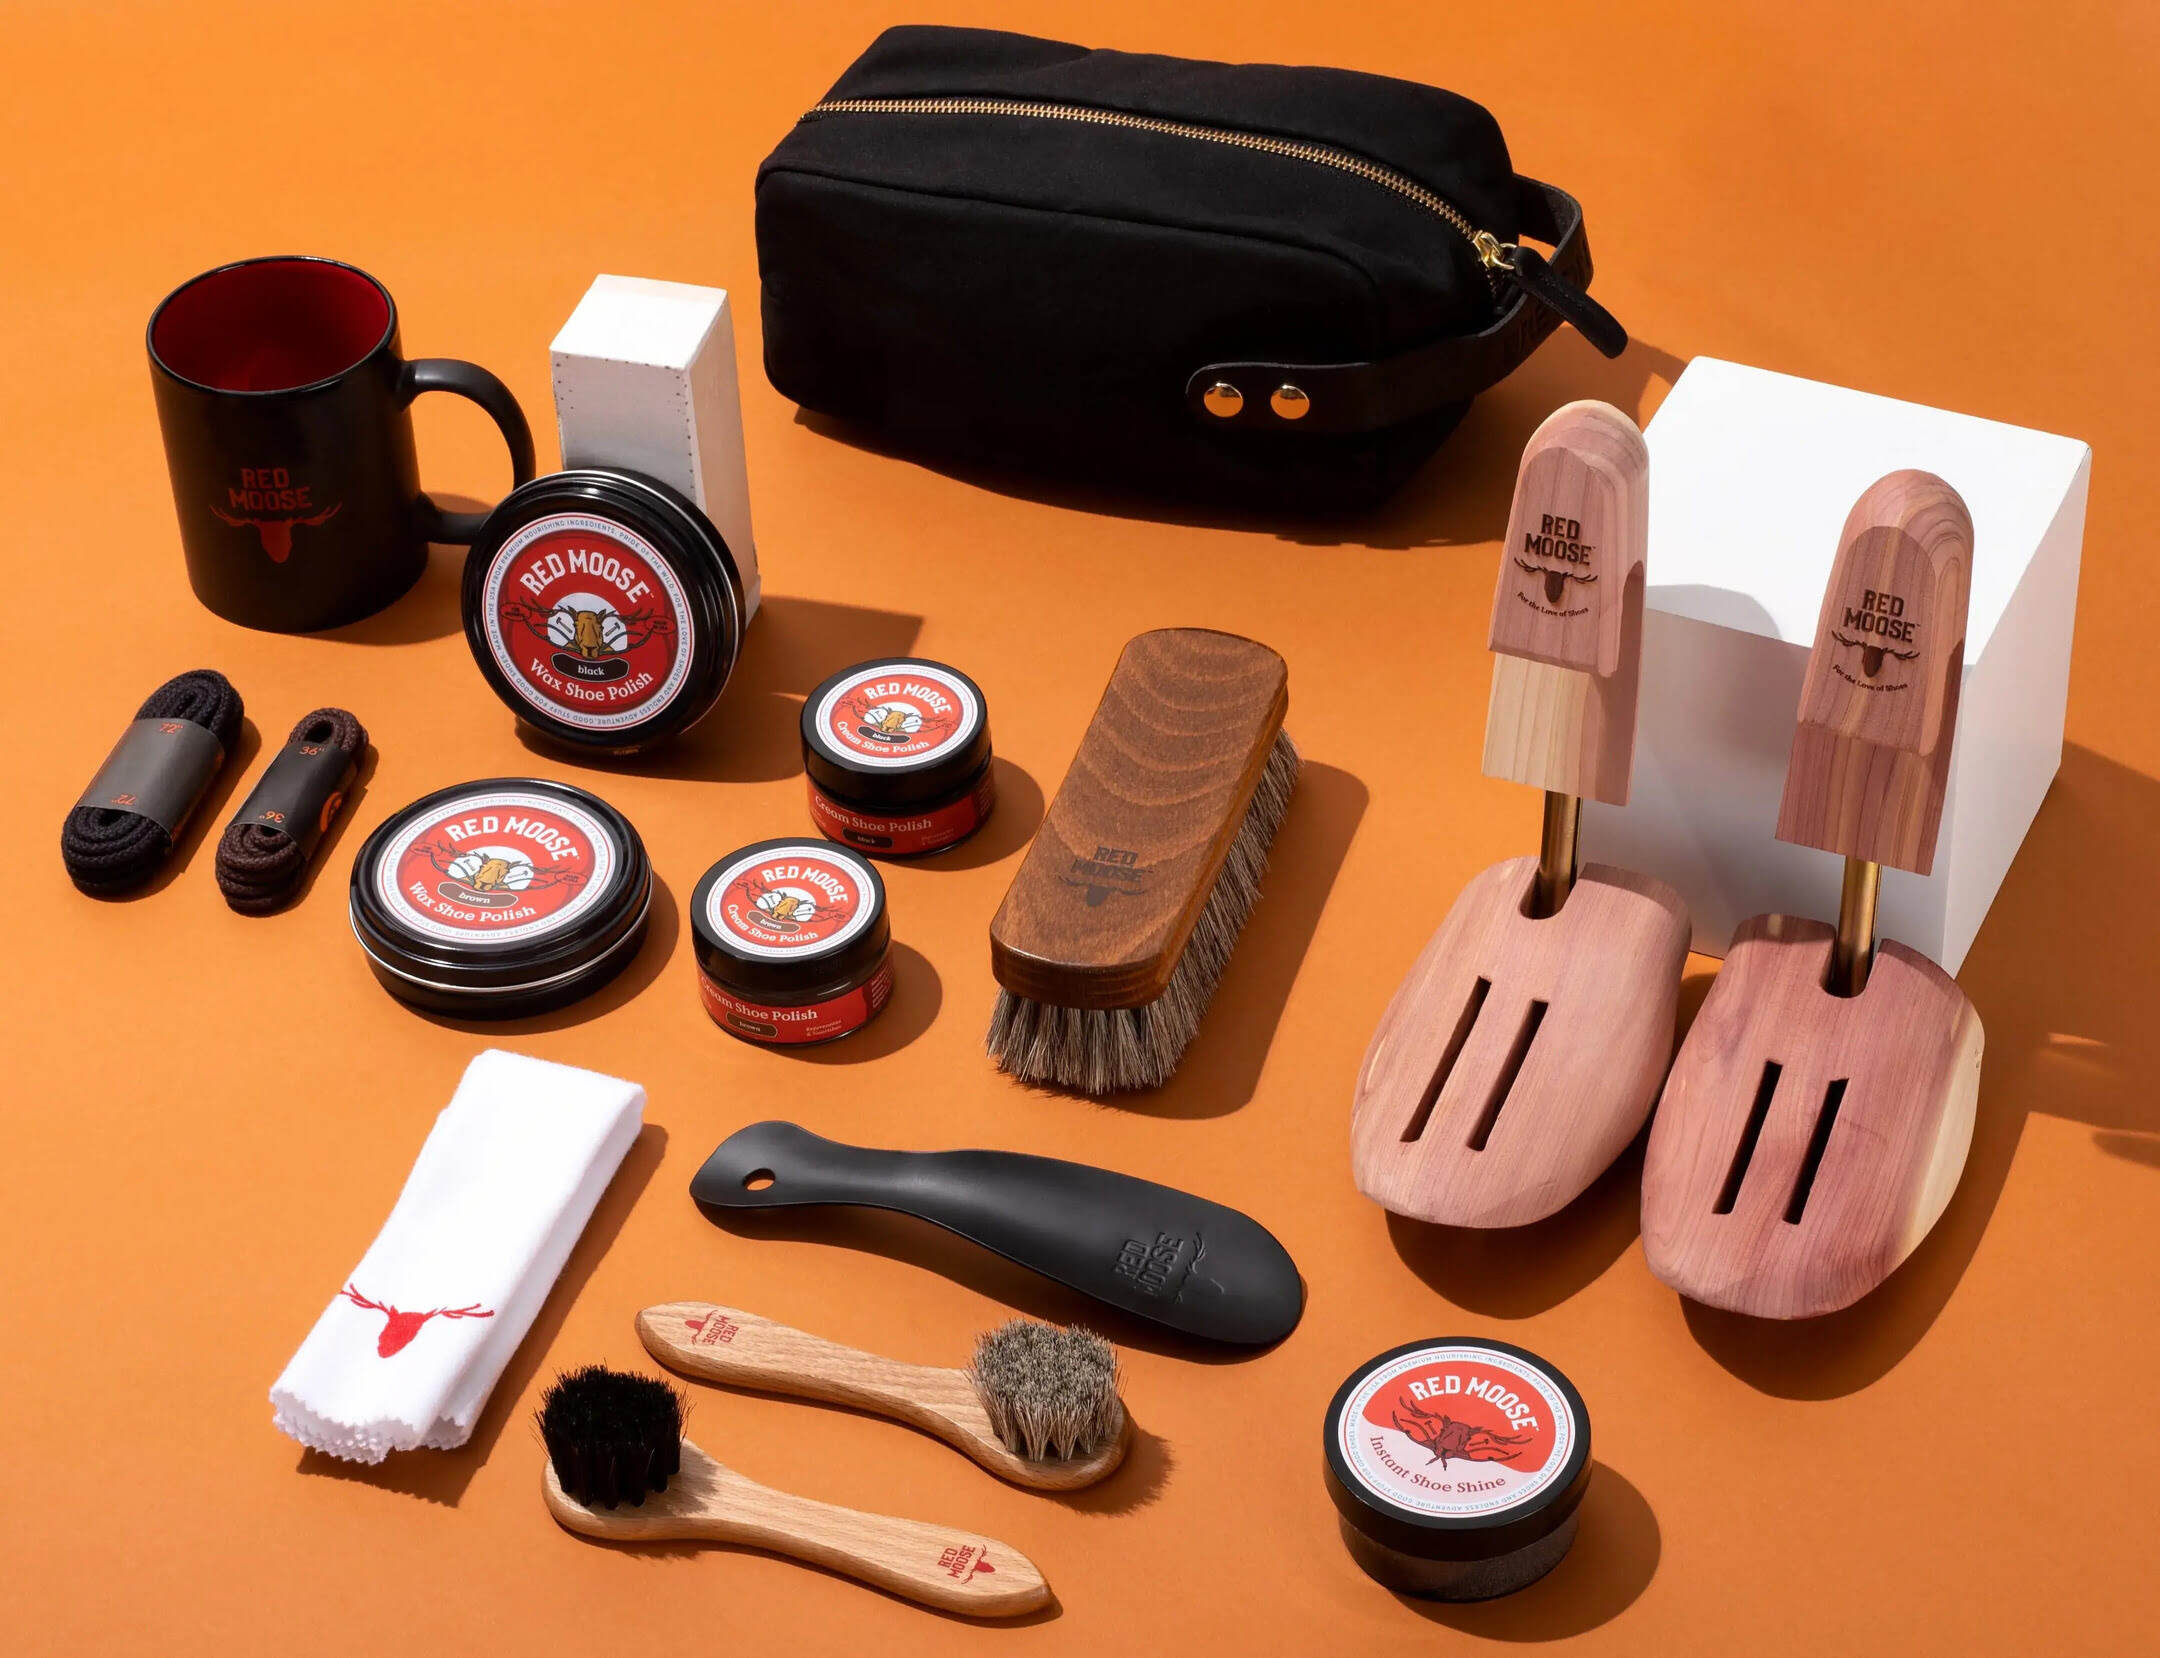 Shoe Polishing Kit Review: Achieve Perfect Shine with this Essential Tool